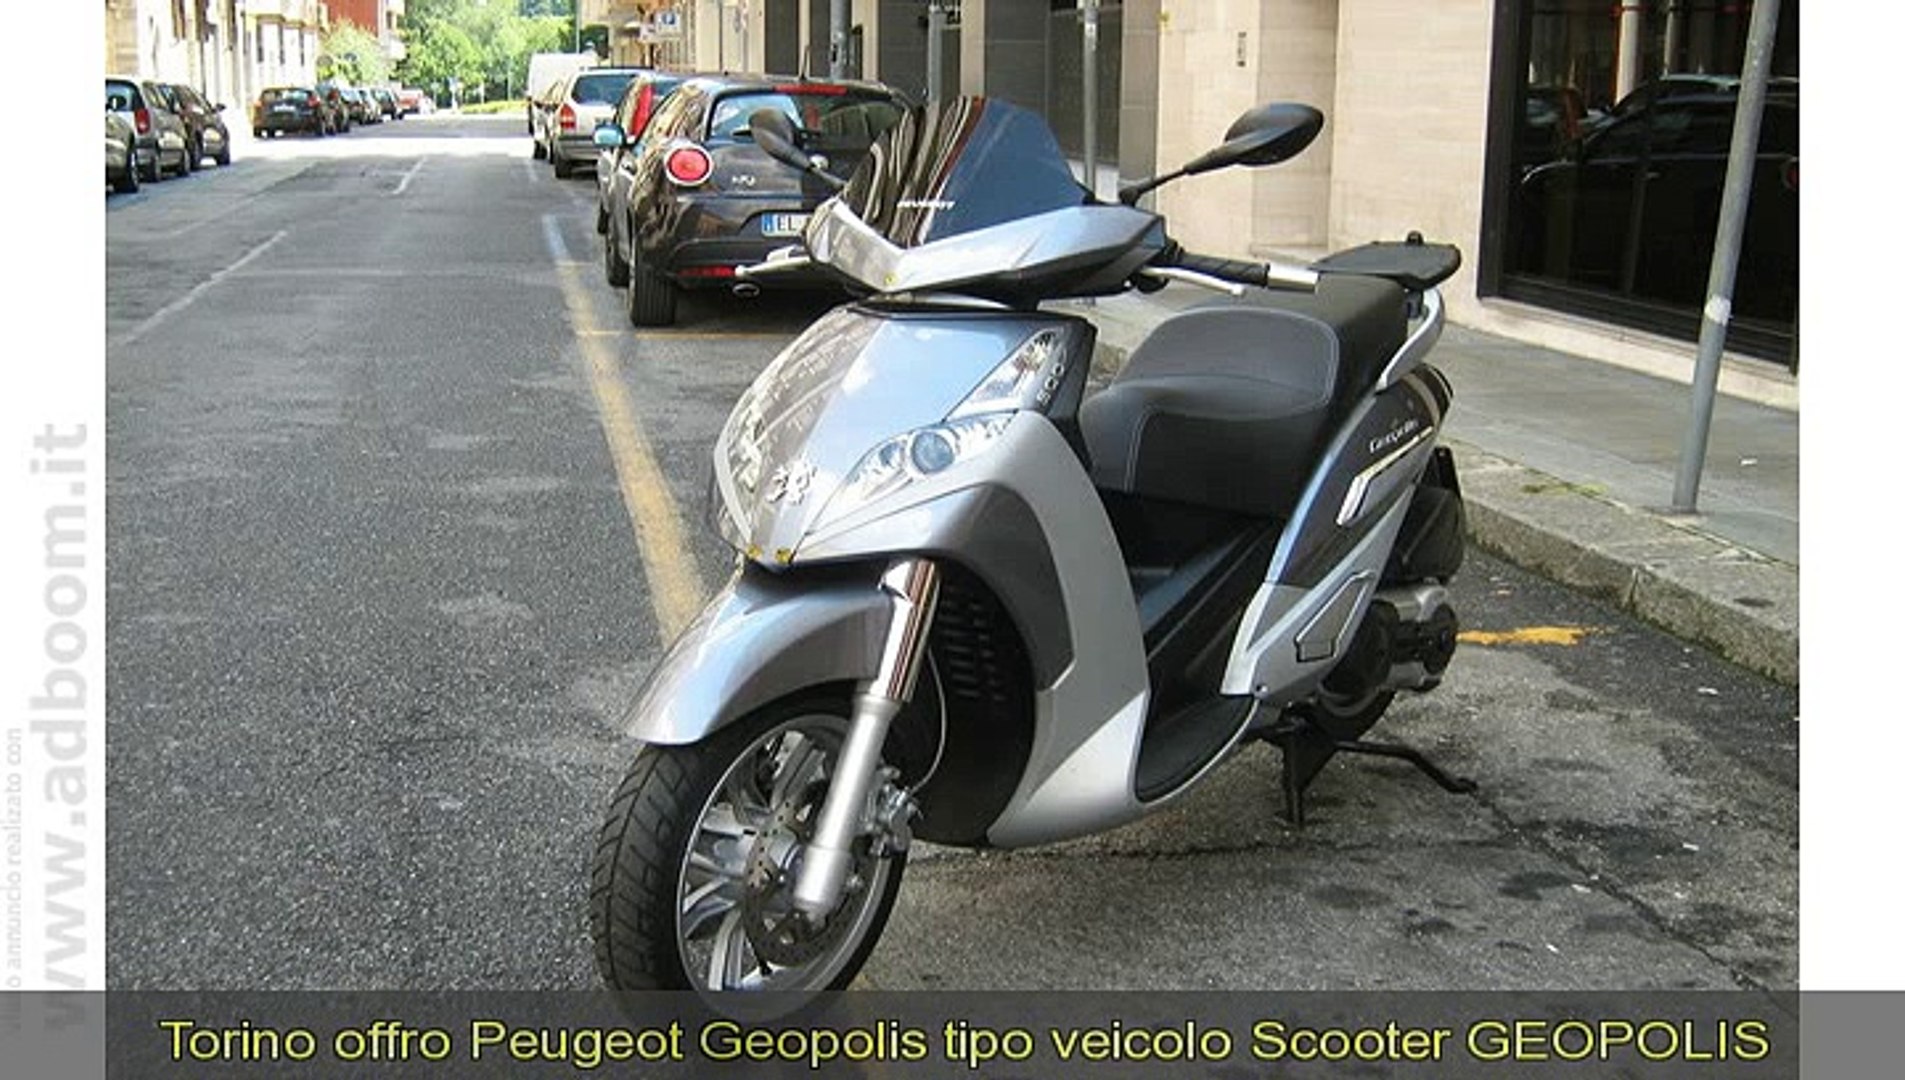 TORINO, PEUGEOT GEOPOLIS TIPO VEICOLO SCOOTER CC 500 - Video Dailymotion